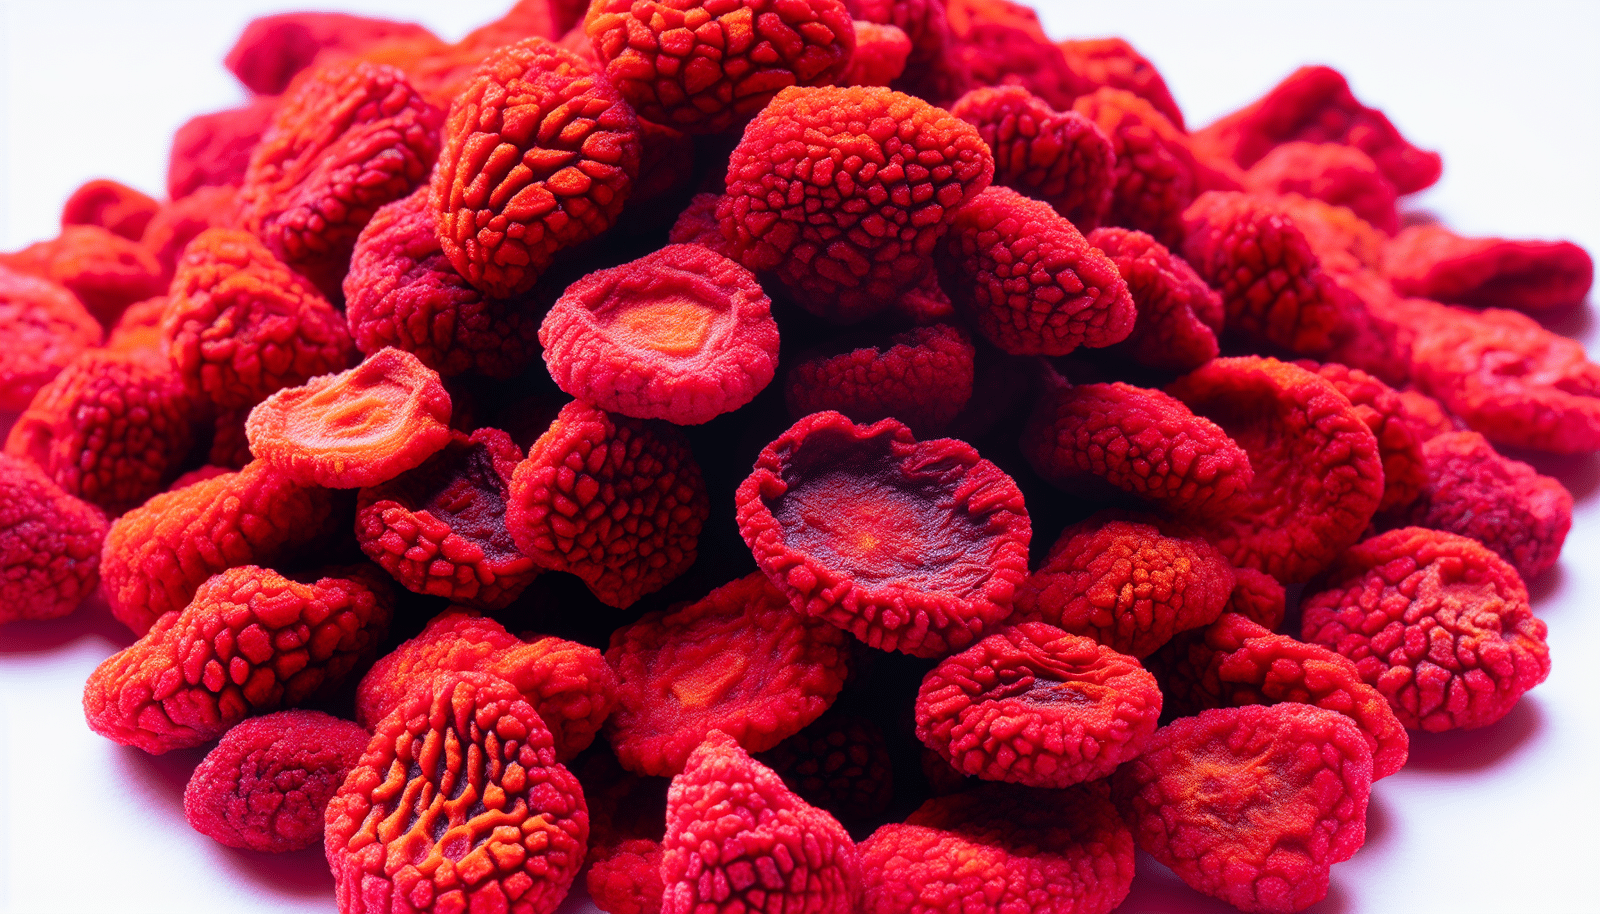 A pile of vibrant freeze-dried strawberries